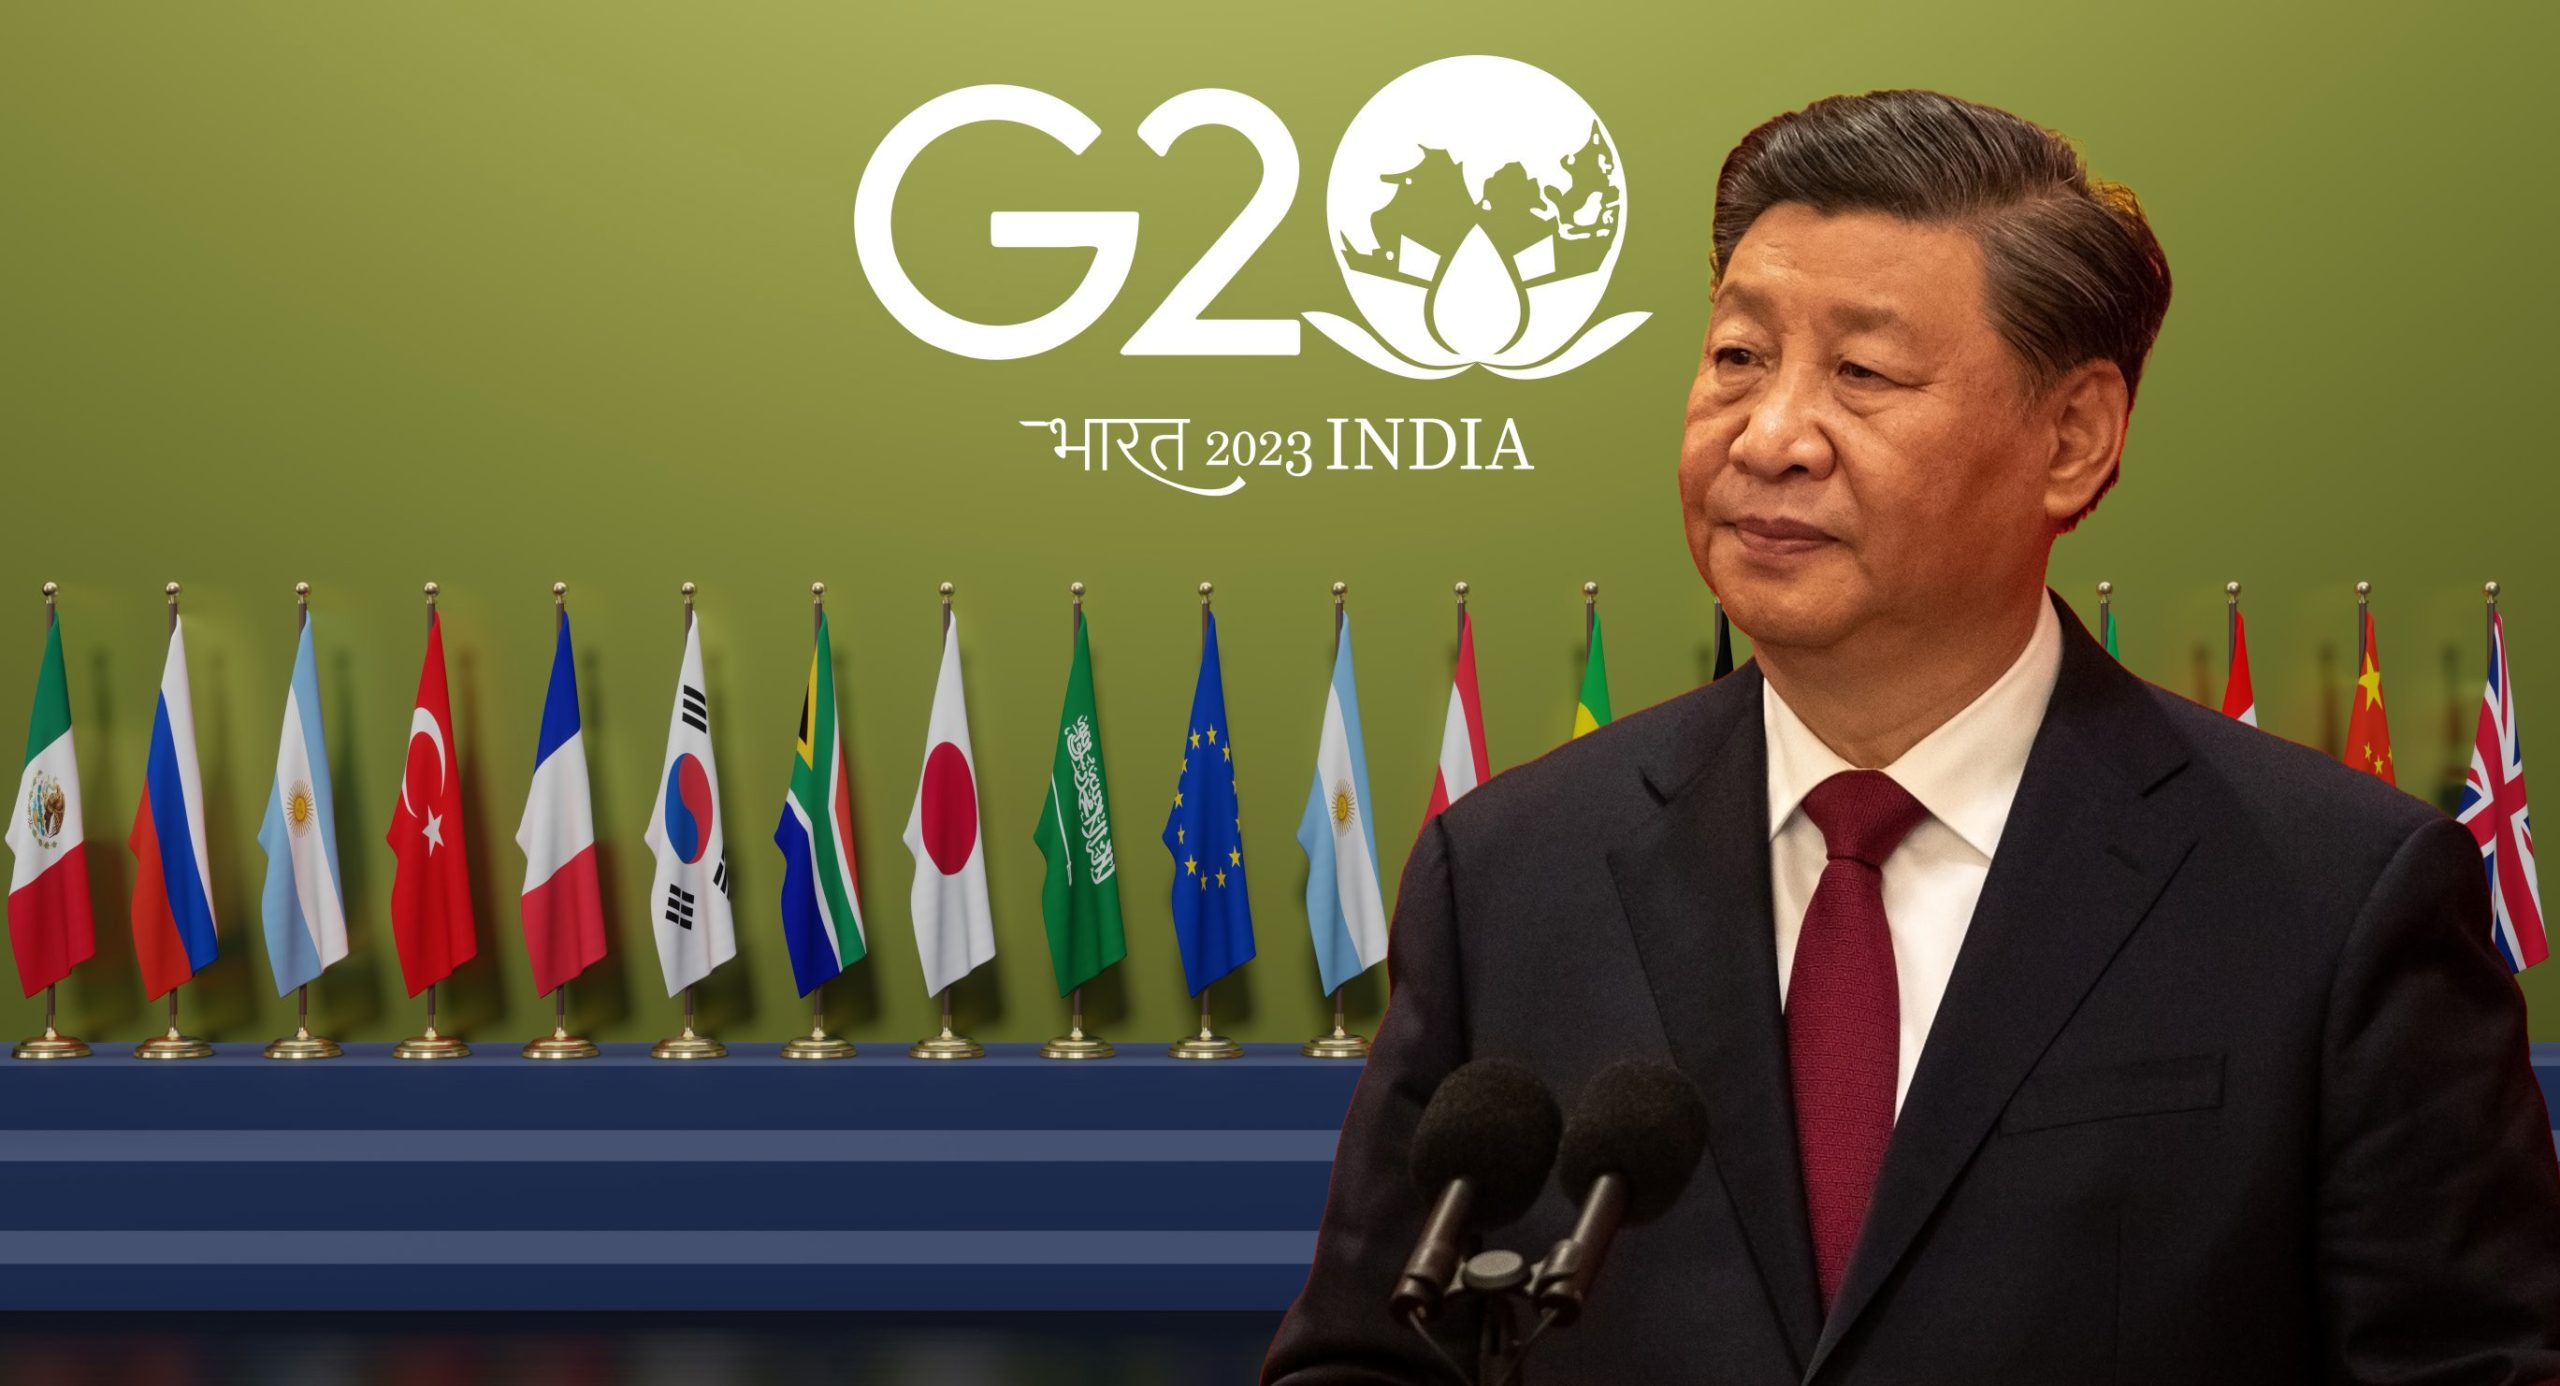 Chinese President Xi Jinping to skip G20 Summit in India